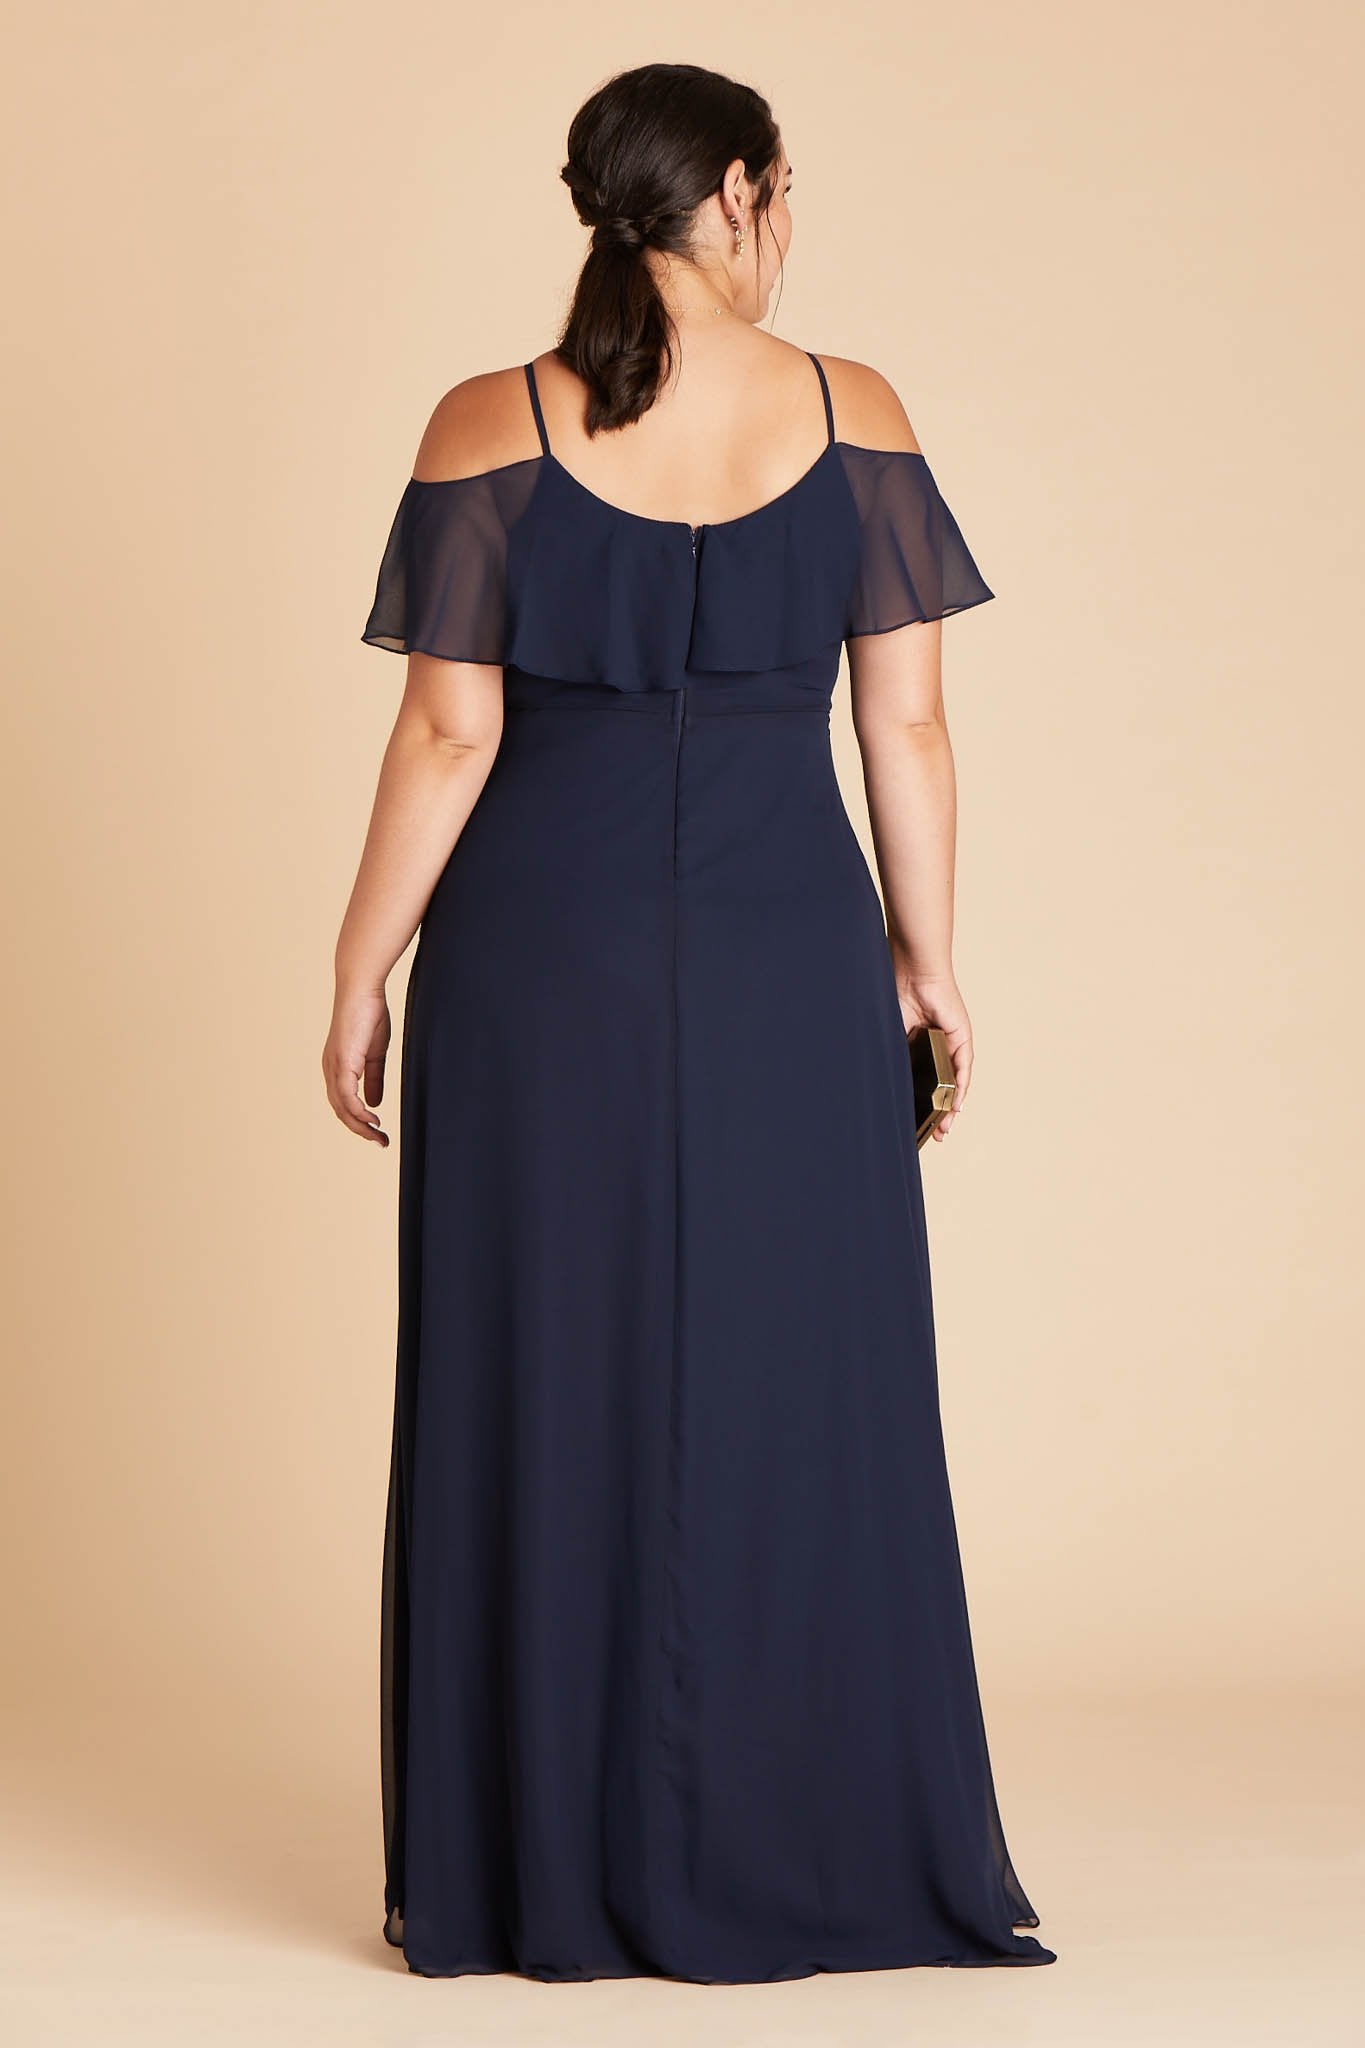 Jane convertible plus size bridesmaid dress in navy blue chiffon by Birdy Grey, back view